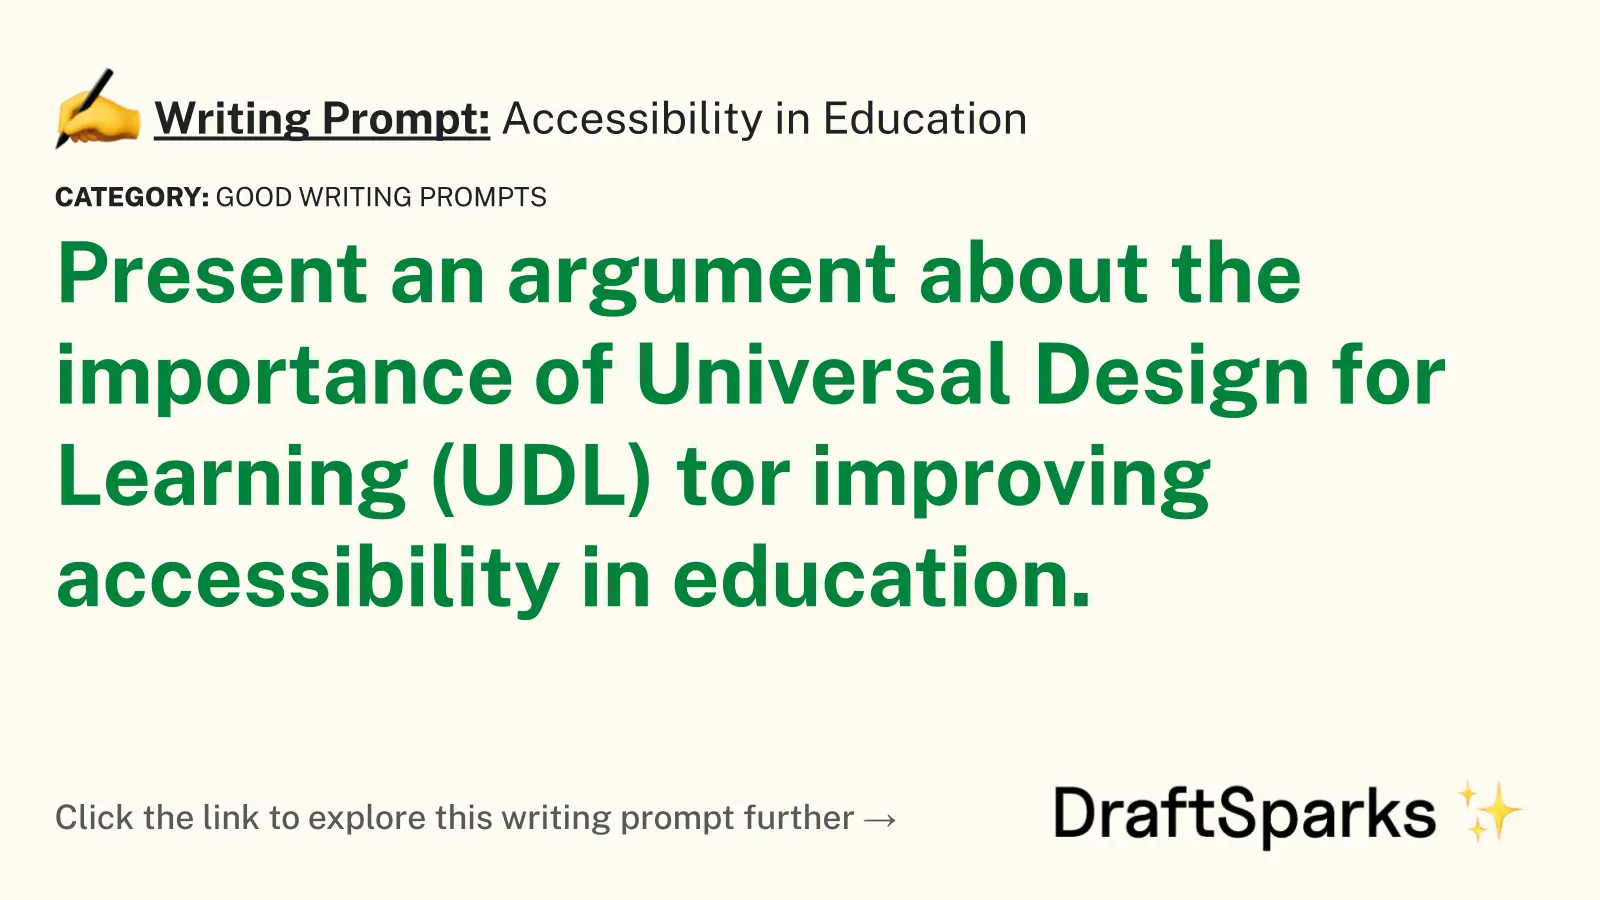 Accessibility in Education